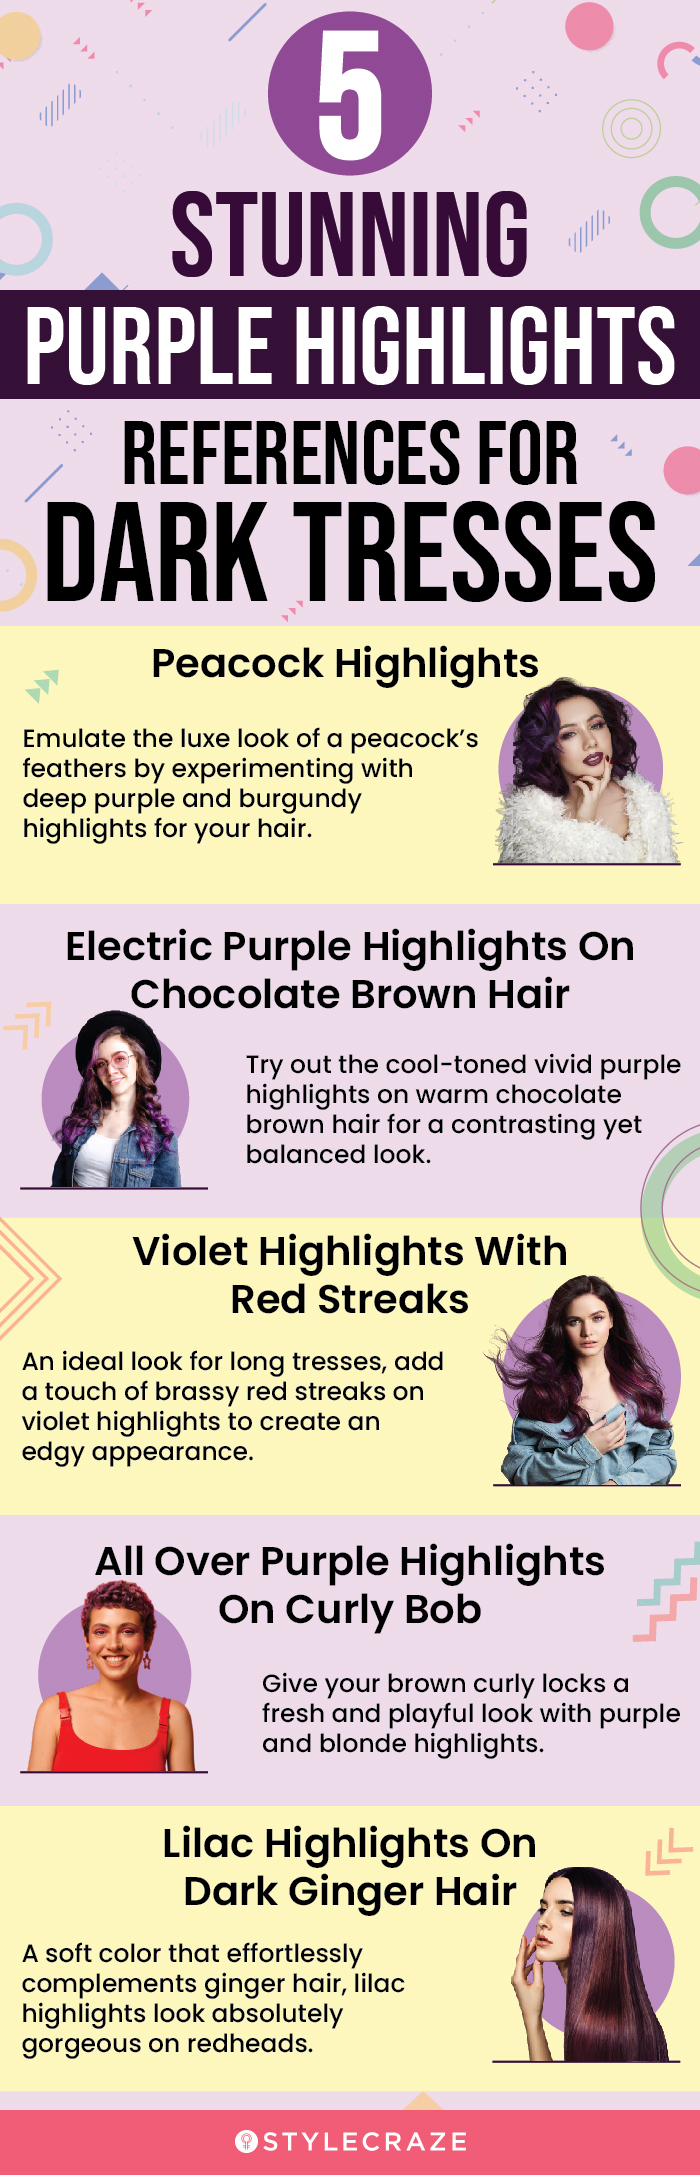 5 stunning purple highlights references for dark tresses (infographic)